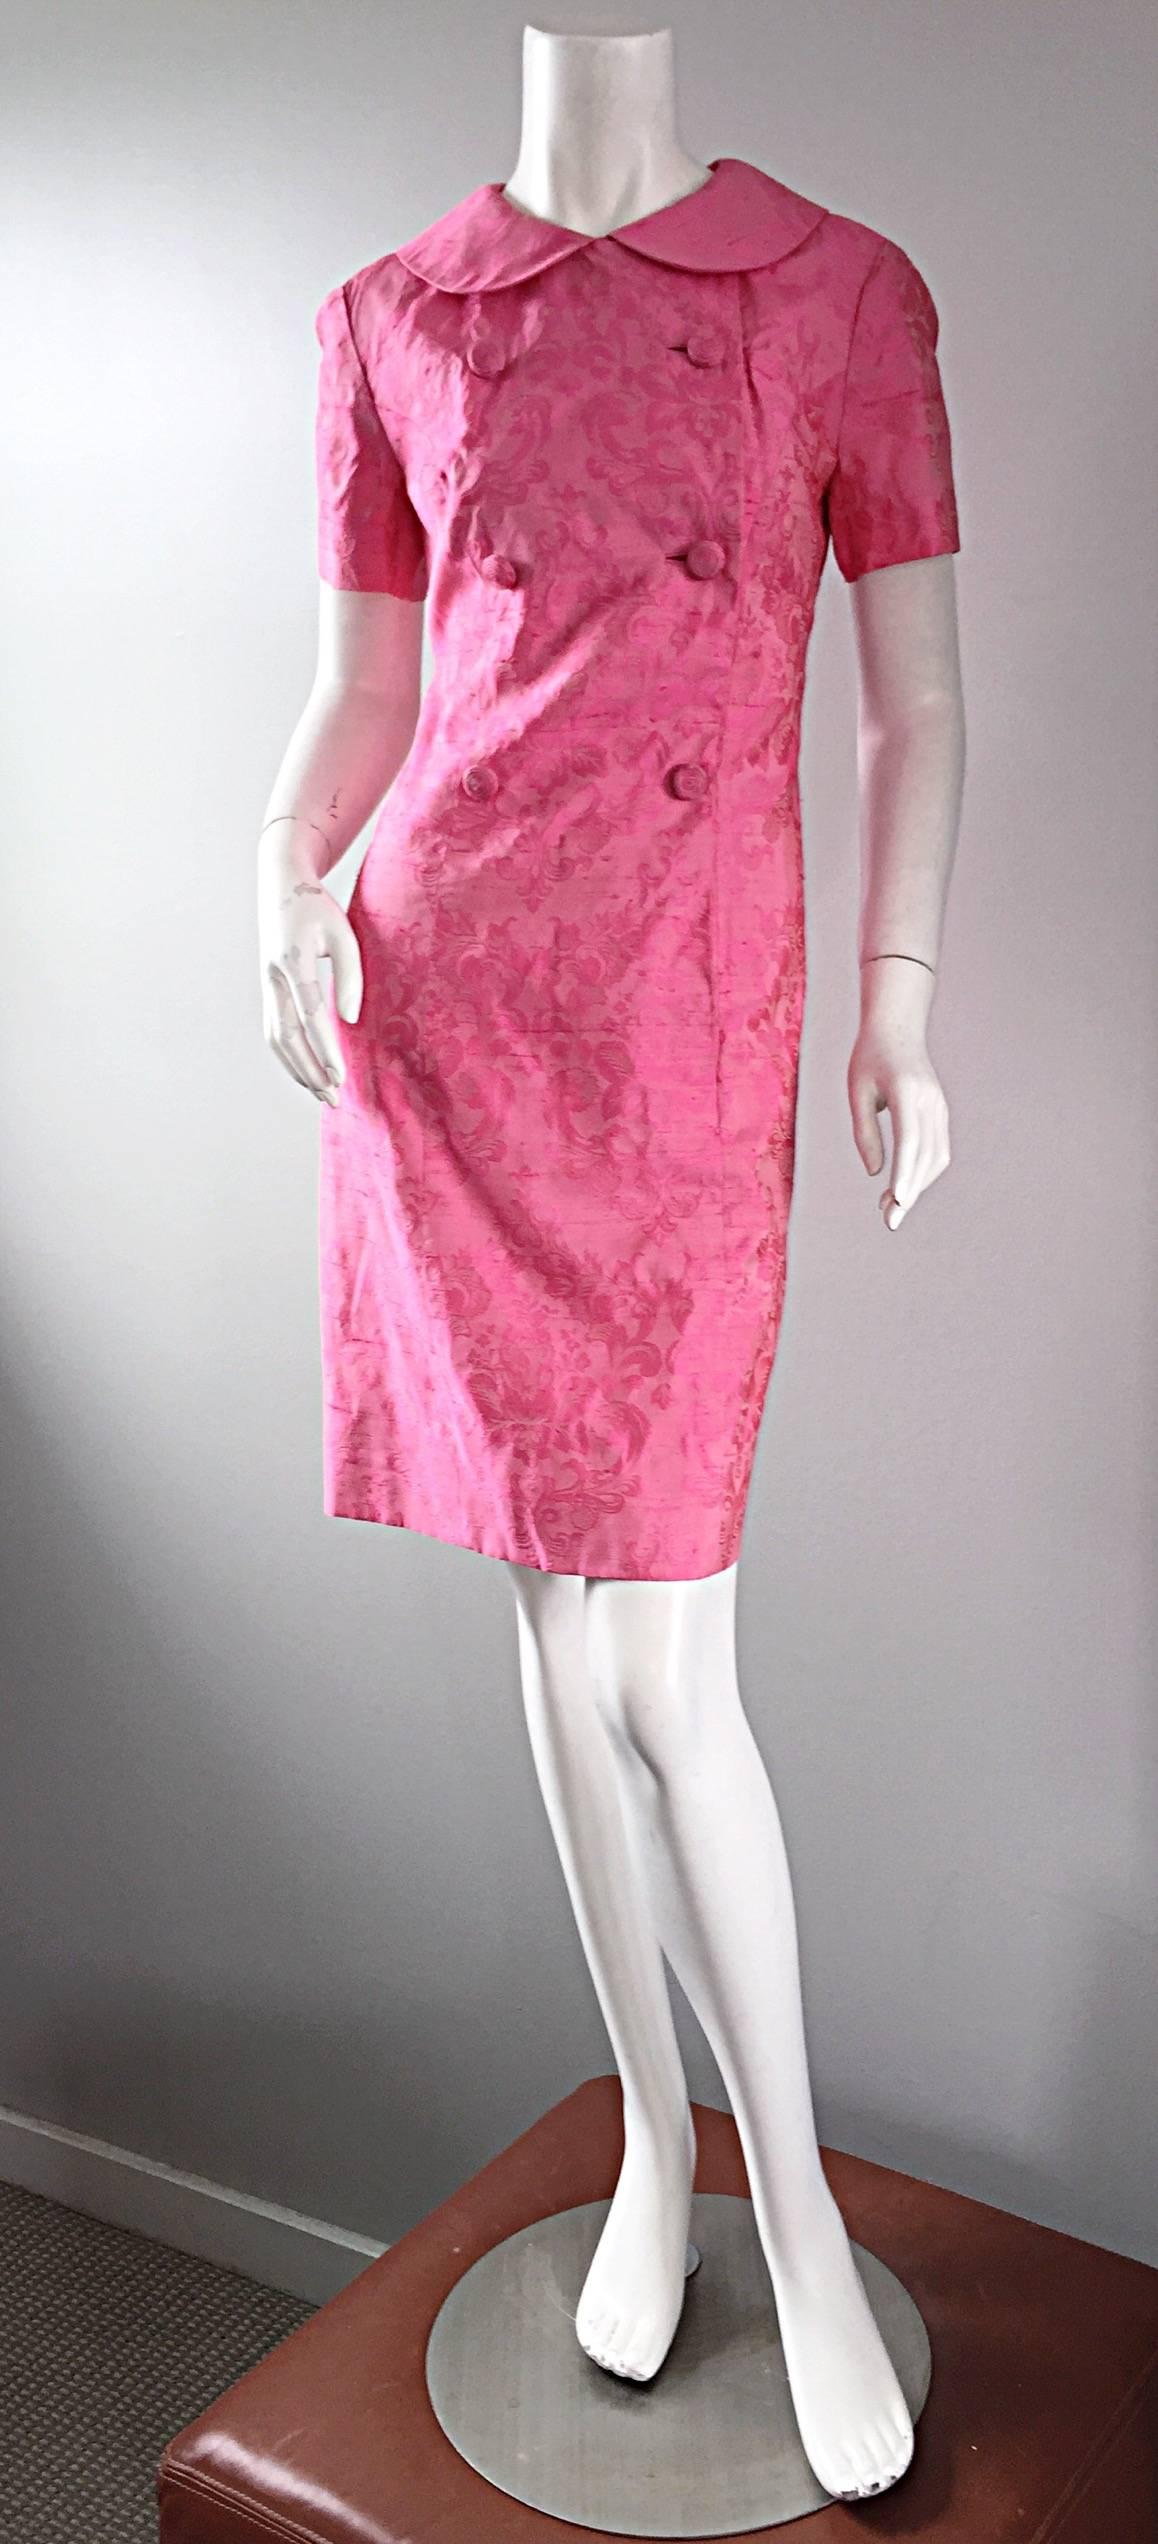 Striking vintage DYNASTY pink silk Jackie Kennedy style dress! Beautiful pink color, with Asian inspired motifs throughout. Intricate silk covered buttons up the bodice, with snaps to secure any 'gaps.' Signature 1960s 'Peter Pan' collar. Fully